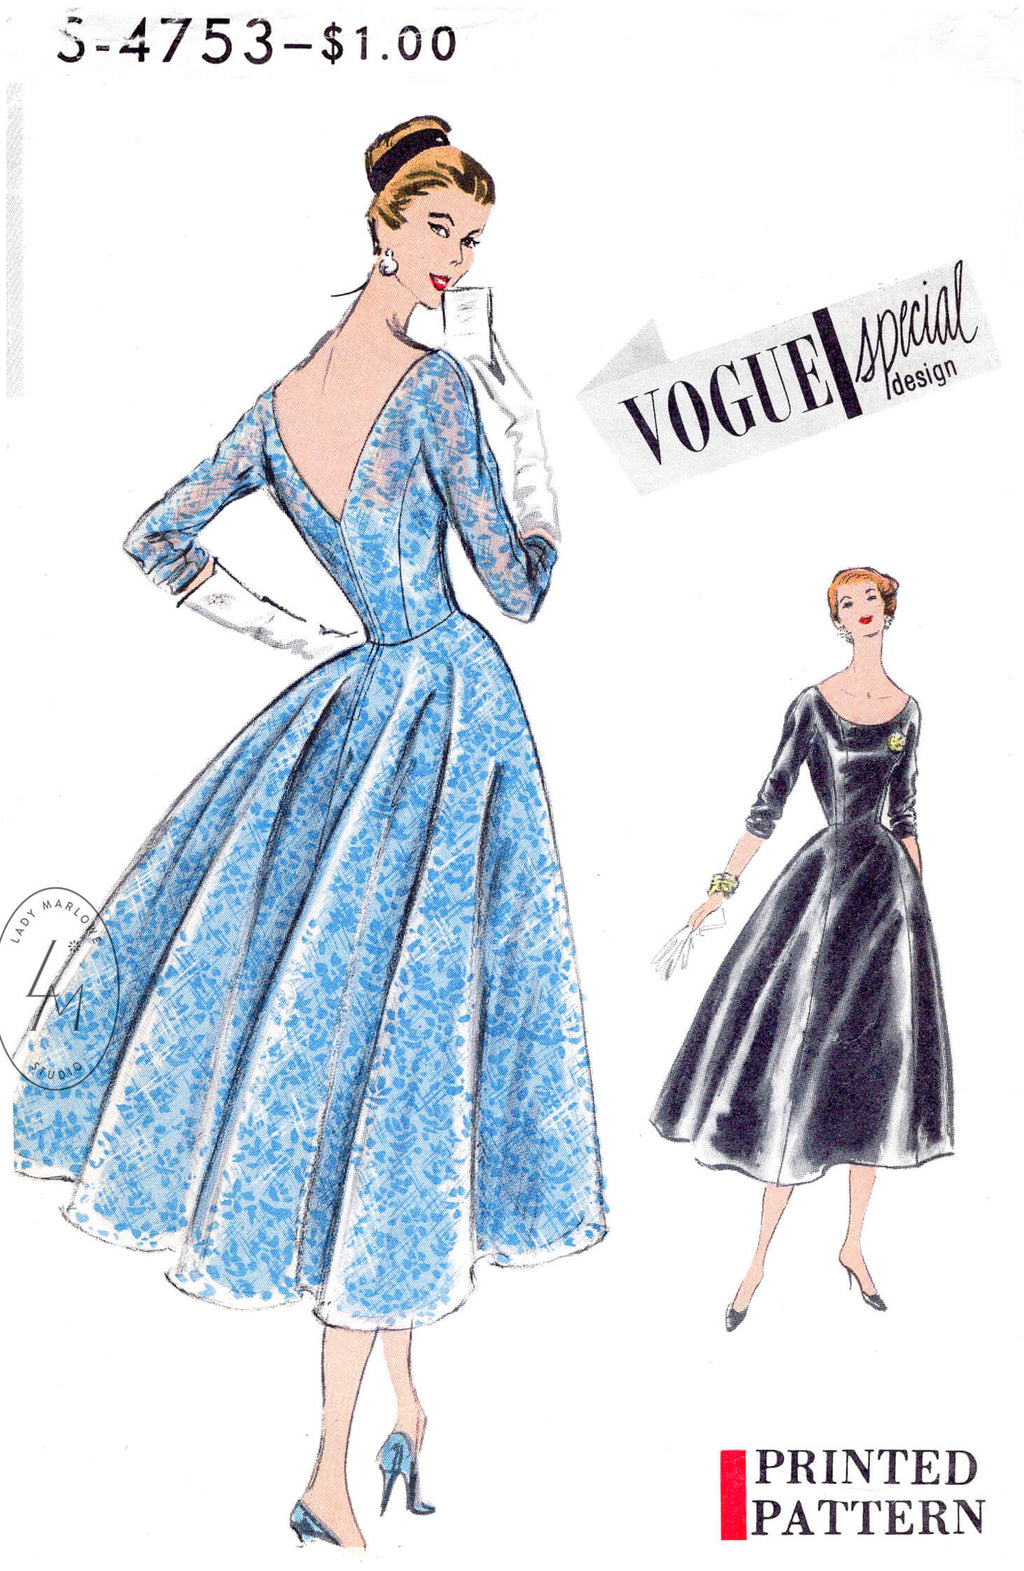 1950s cocktail dress vintage sewing pattern reproduction scoop neck, deep V back, full skirt and petticoat